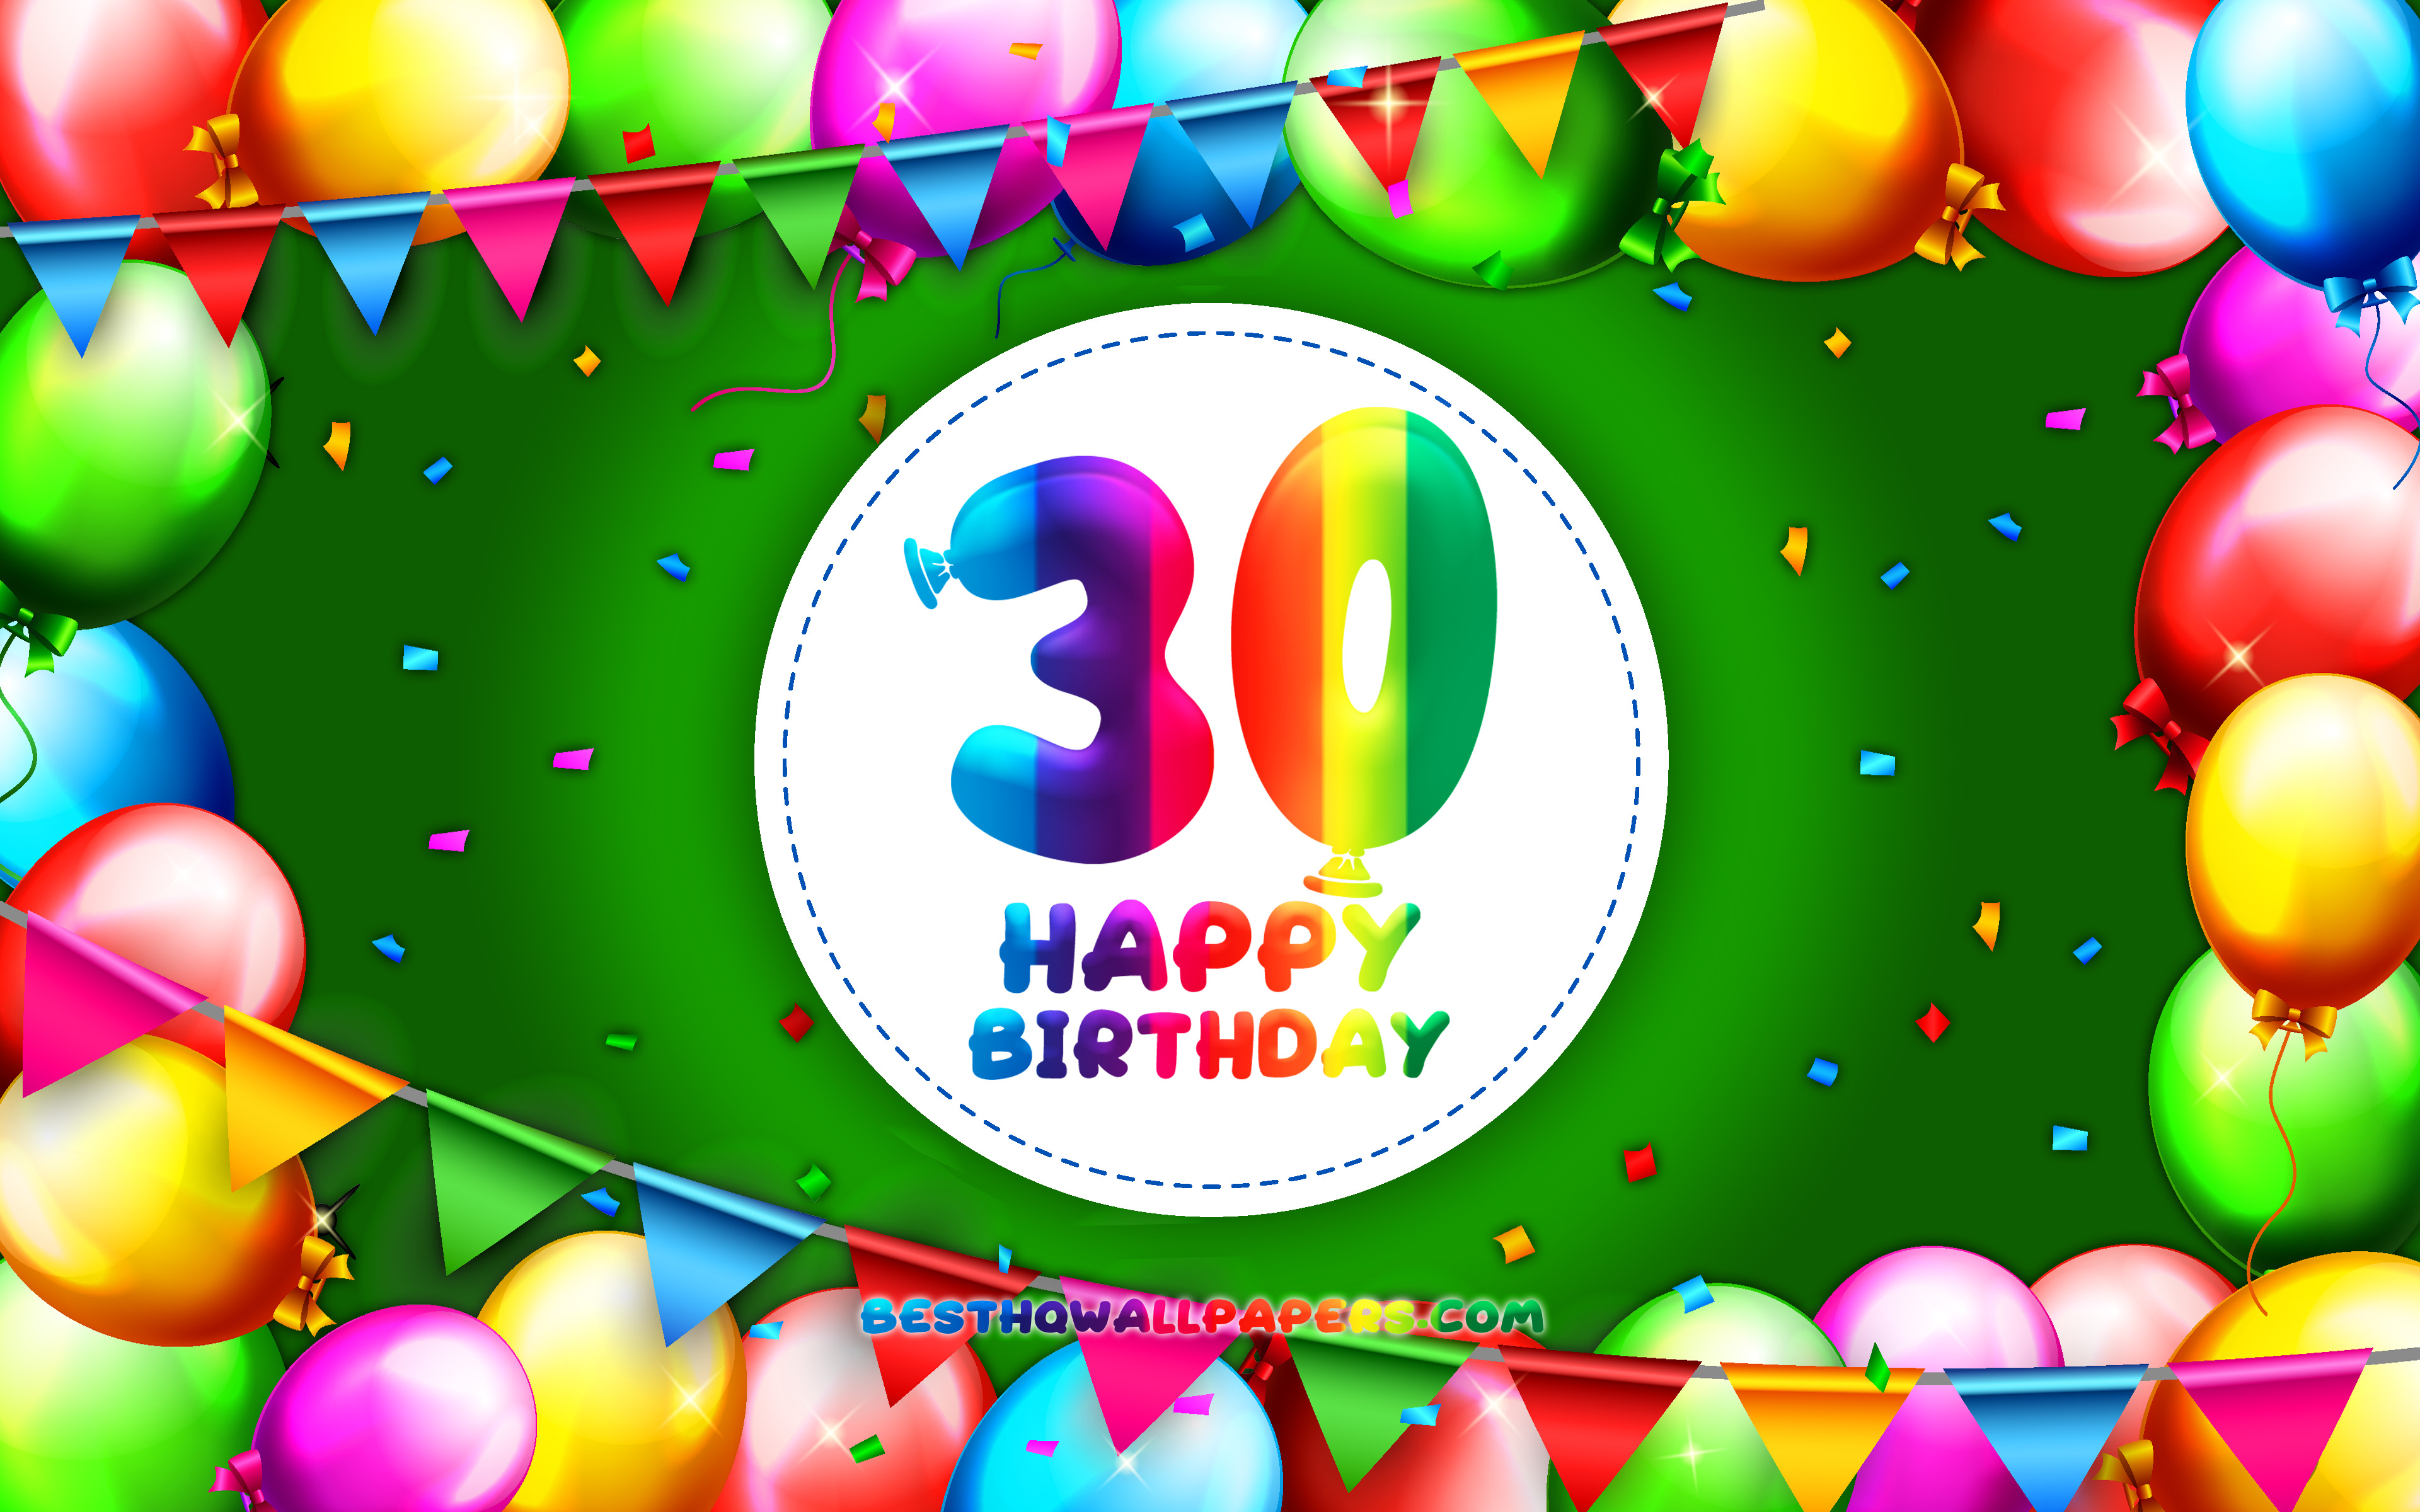 Download wallpaper Happy 30th birthday, 4k, colorful balloon frame, Birthday Party, green background, Happy 30 Years Birthday, creative, 30th Birthday, Birthday concept, 30th Birthday Party for desktop with resolution 3840x2400. High Quality